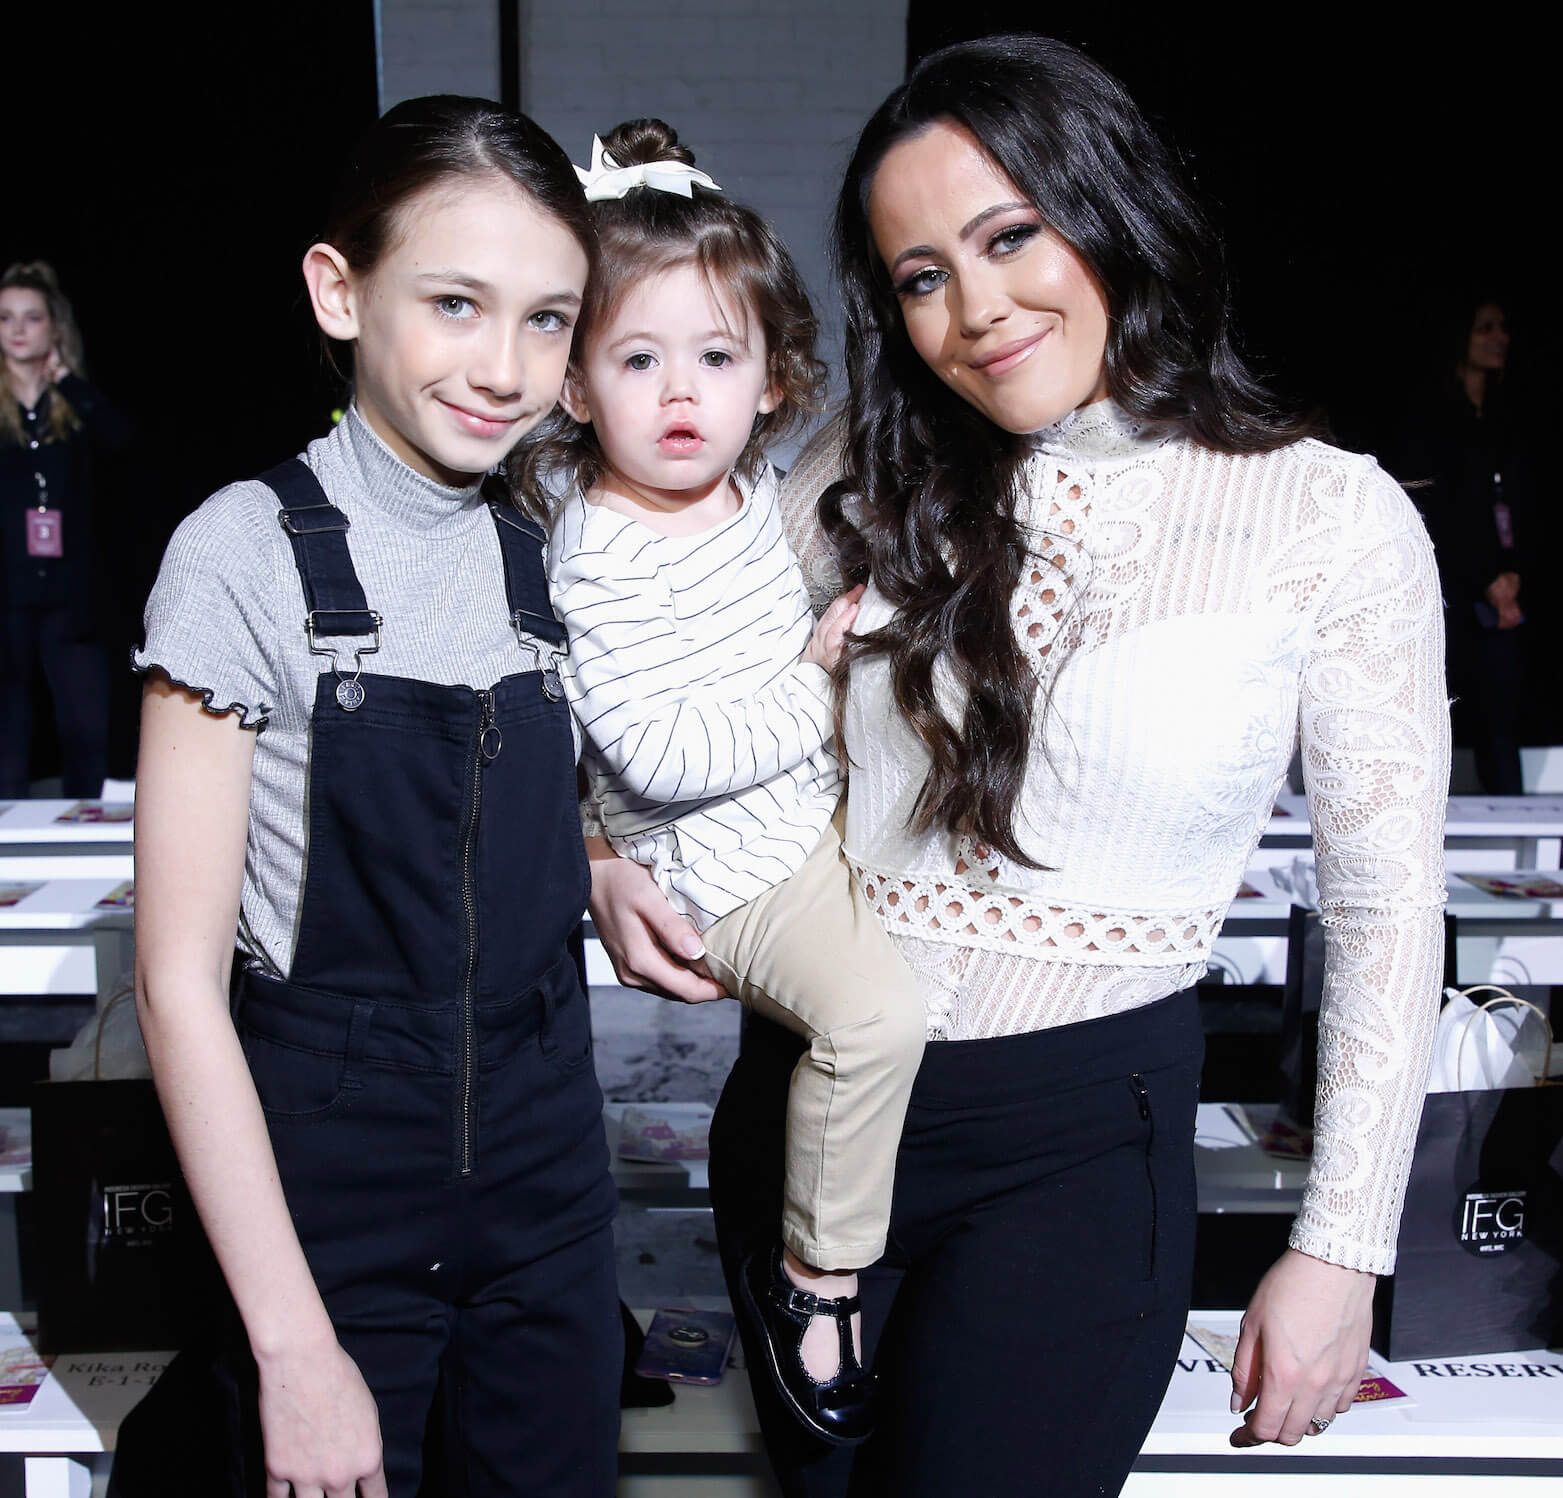 'Teen Mom 2' star Jenelle Evans with her 2 kids, Jace and Ensley